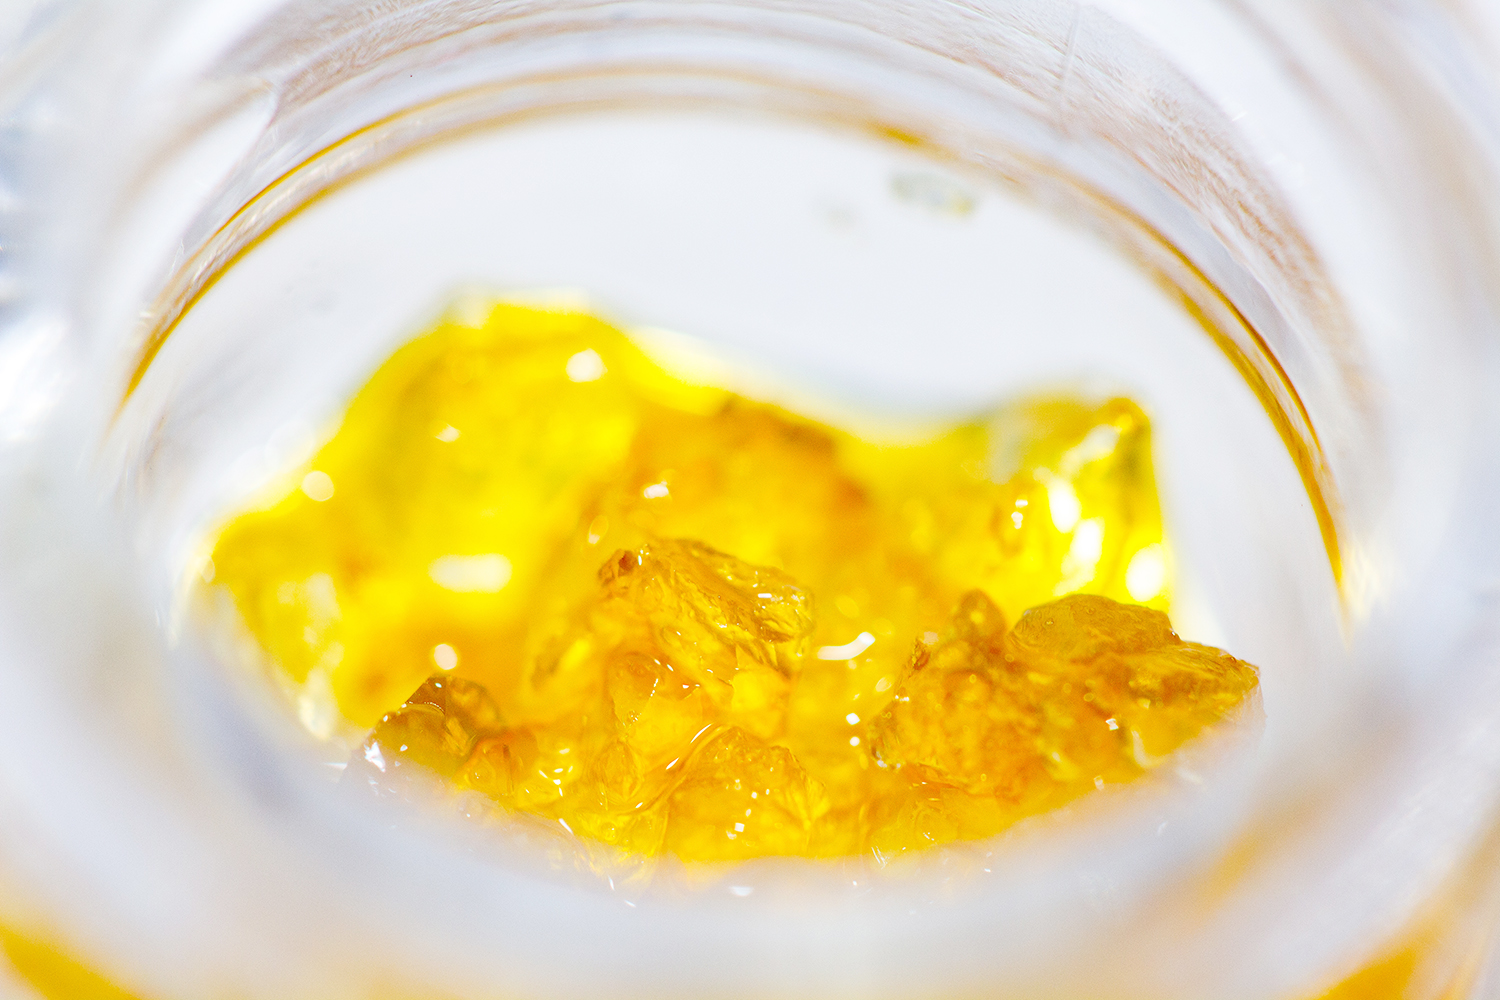 Medical & Recreational Live Resin Extractions For Sale